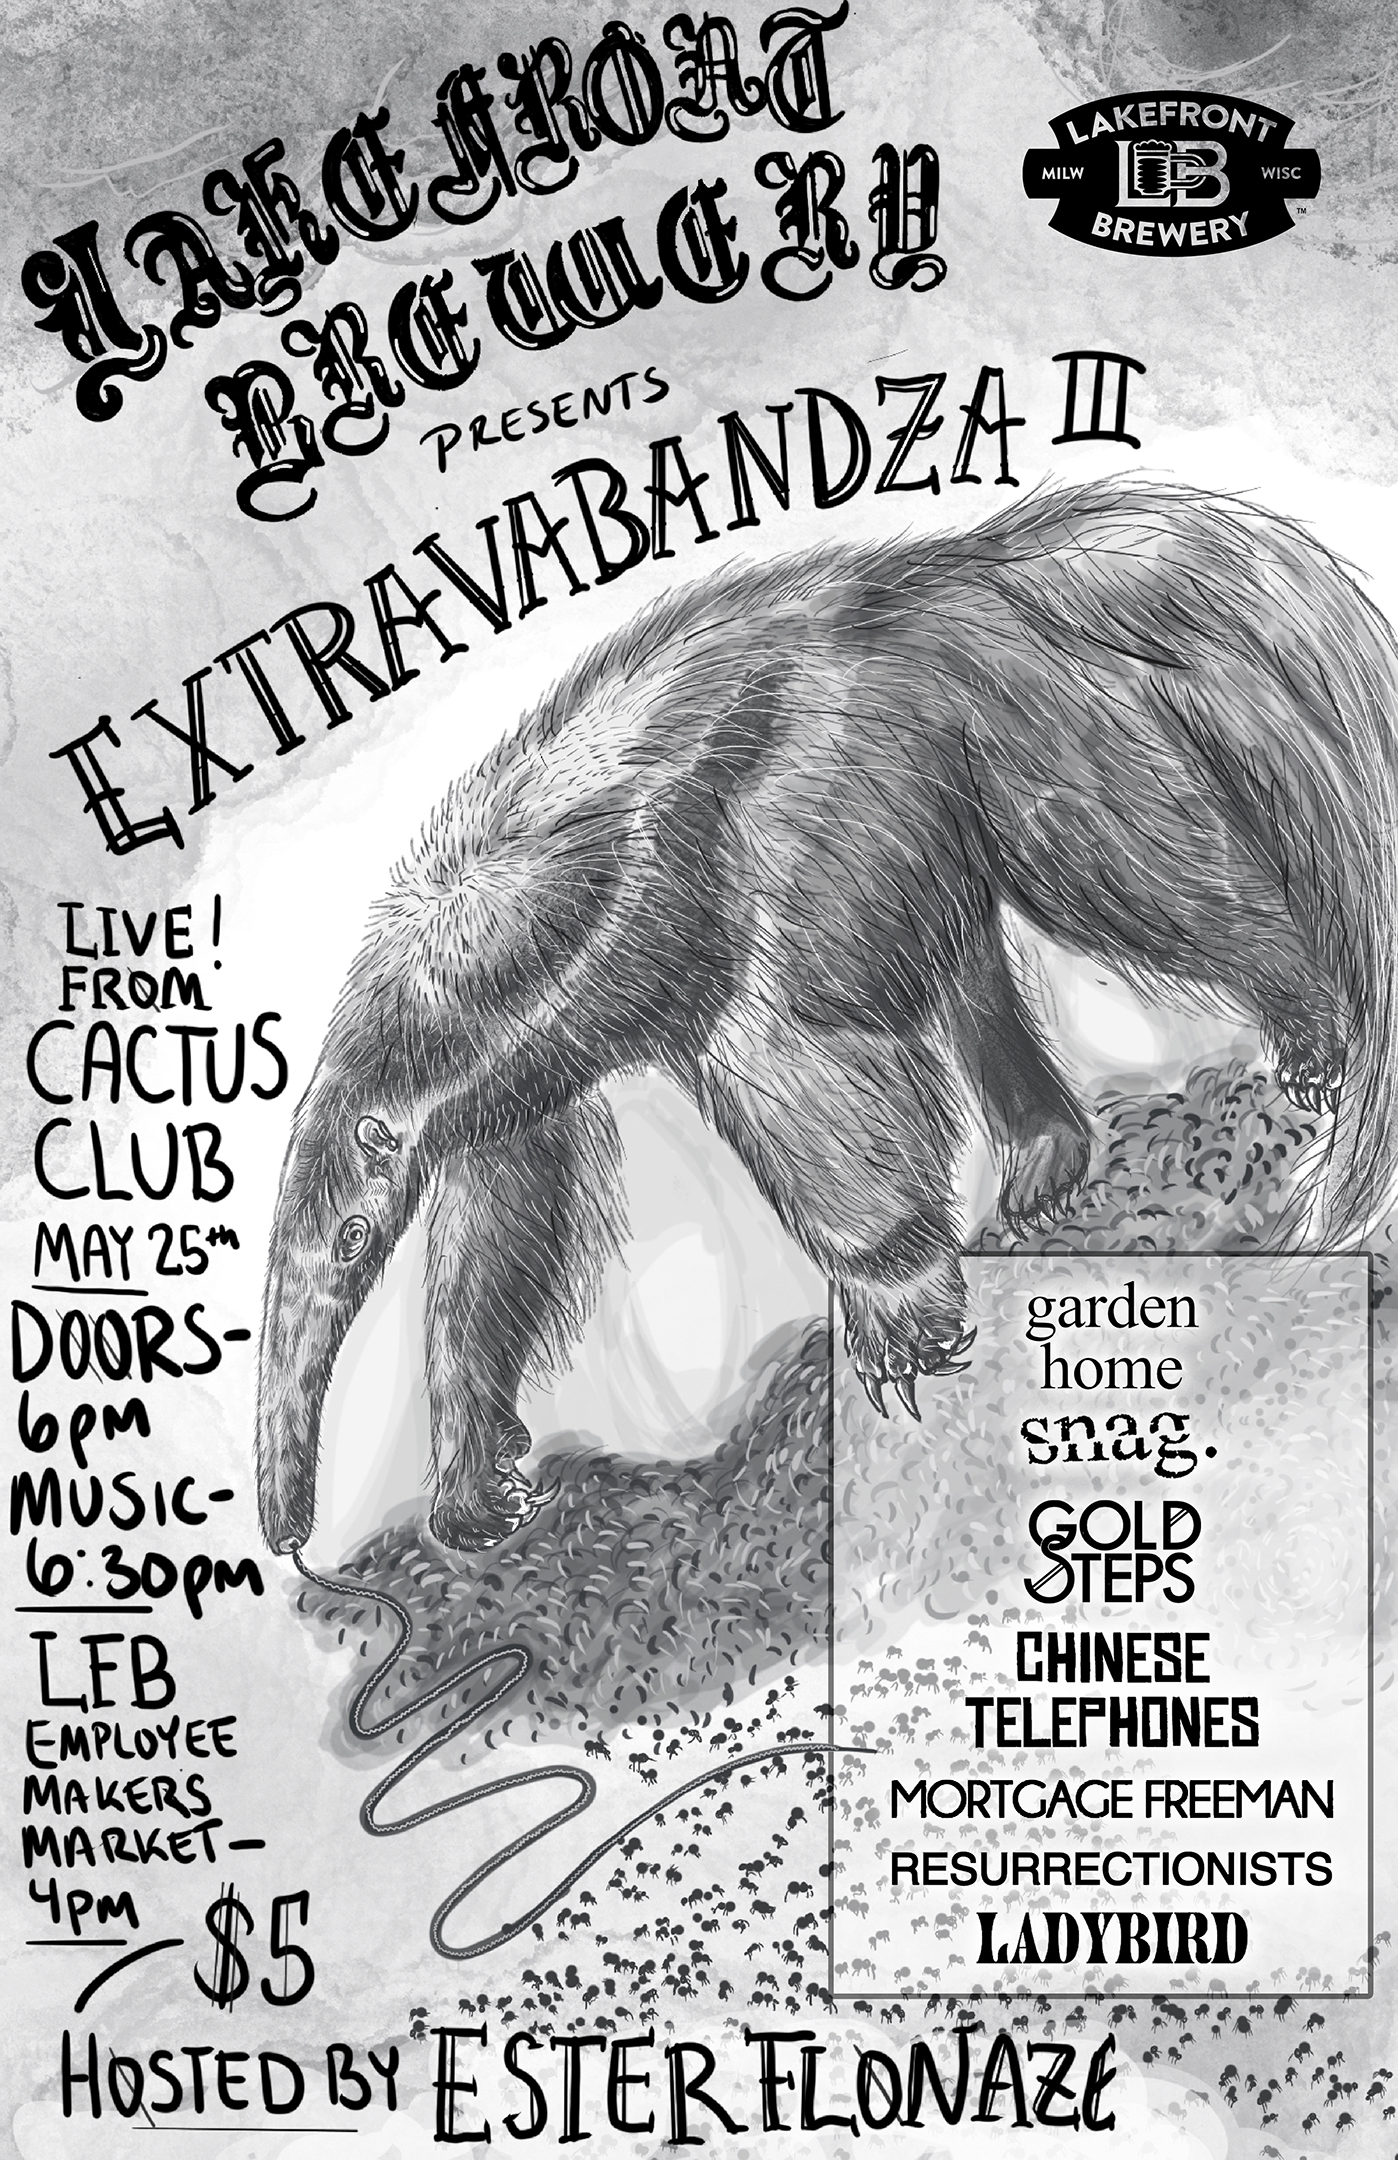 Lakefront Brewery is Back Celebrating Local Music with Extravabandza III